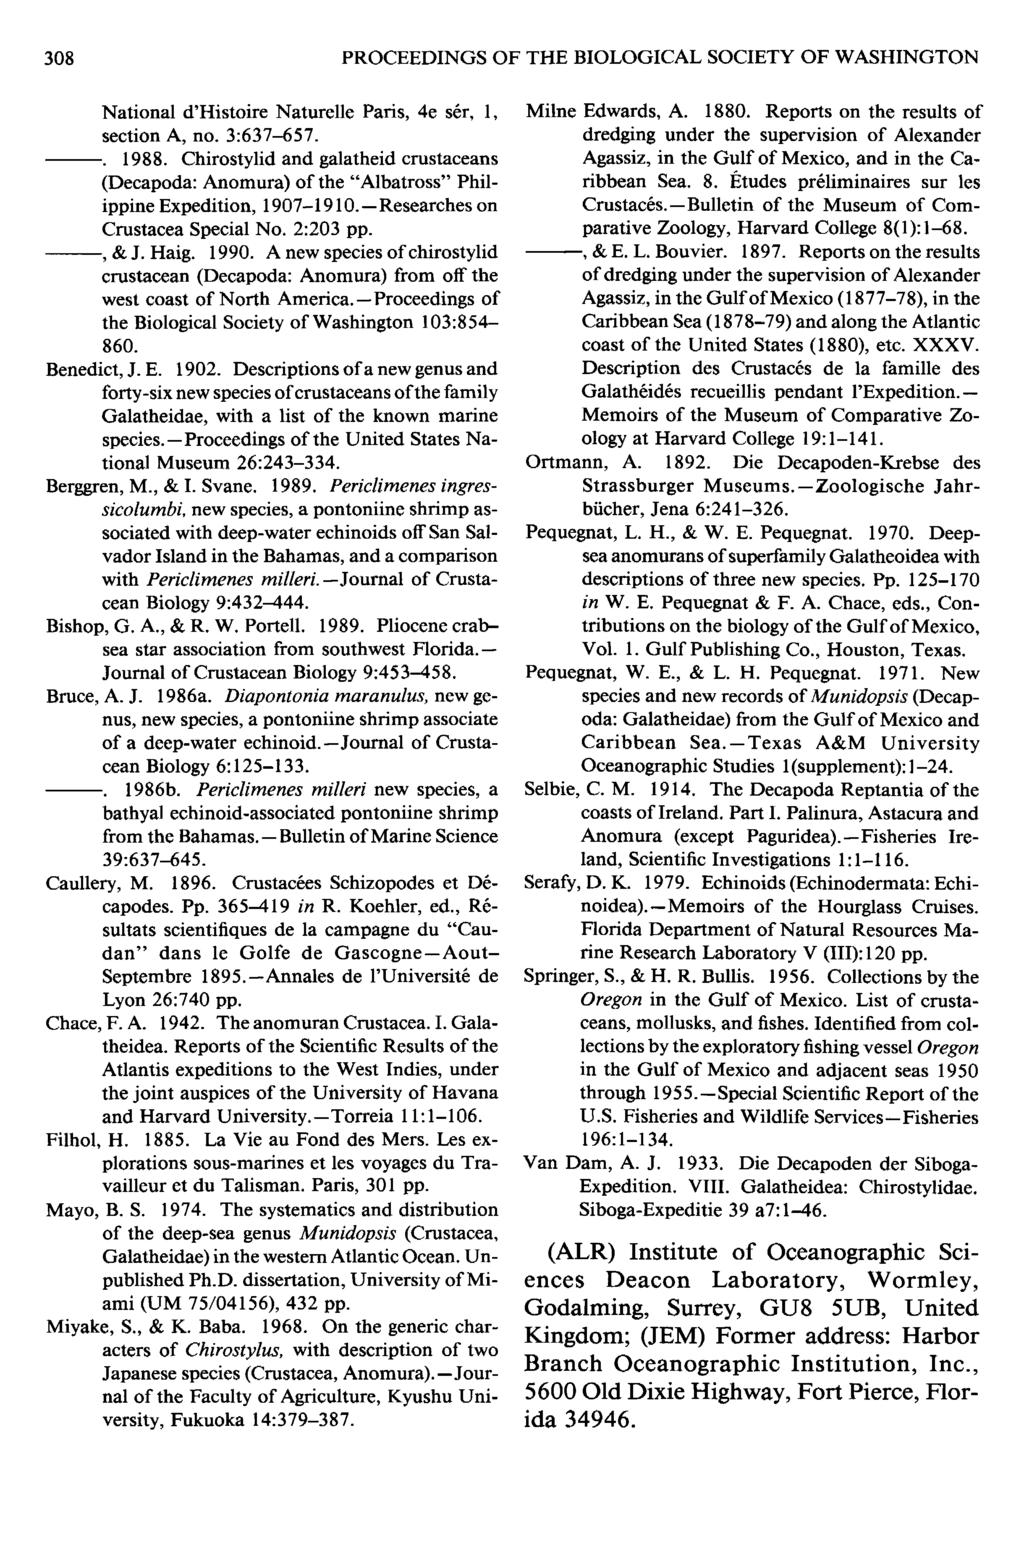 308 PROCEEDINGS OF THE BIOLOGICAL SOCIETY OF WASHINGTON National d'histoire Naturelle Paris, 4e ser, 1, section A, no. 3:637-657.. 1988.